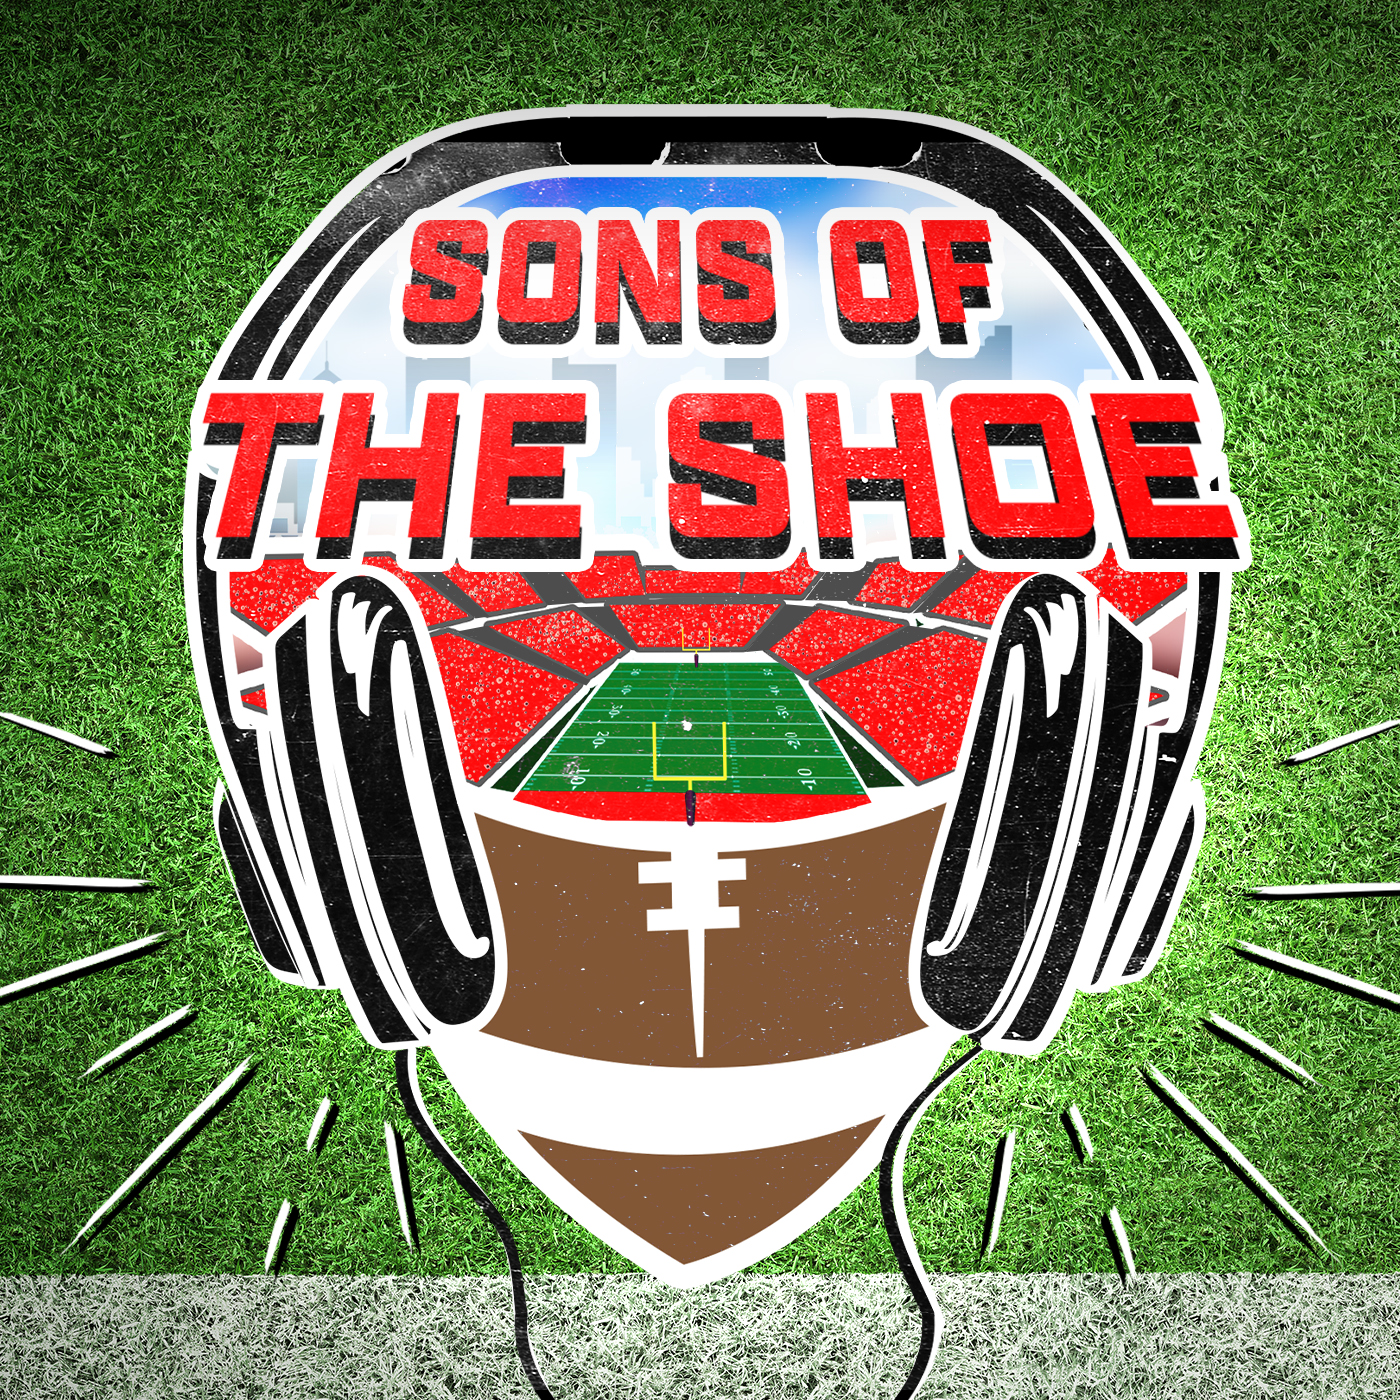 BONUS: Is Ohio State Ready To Handle No. 1 Ranking? | 'Sons of the Shoe'